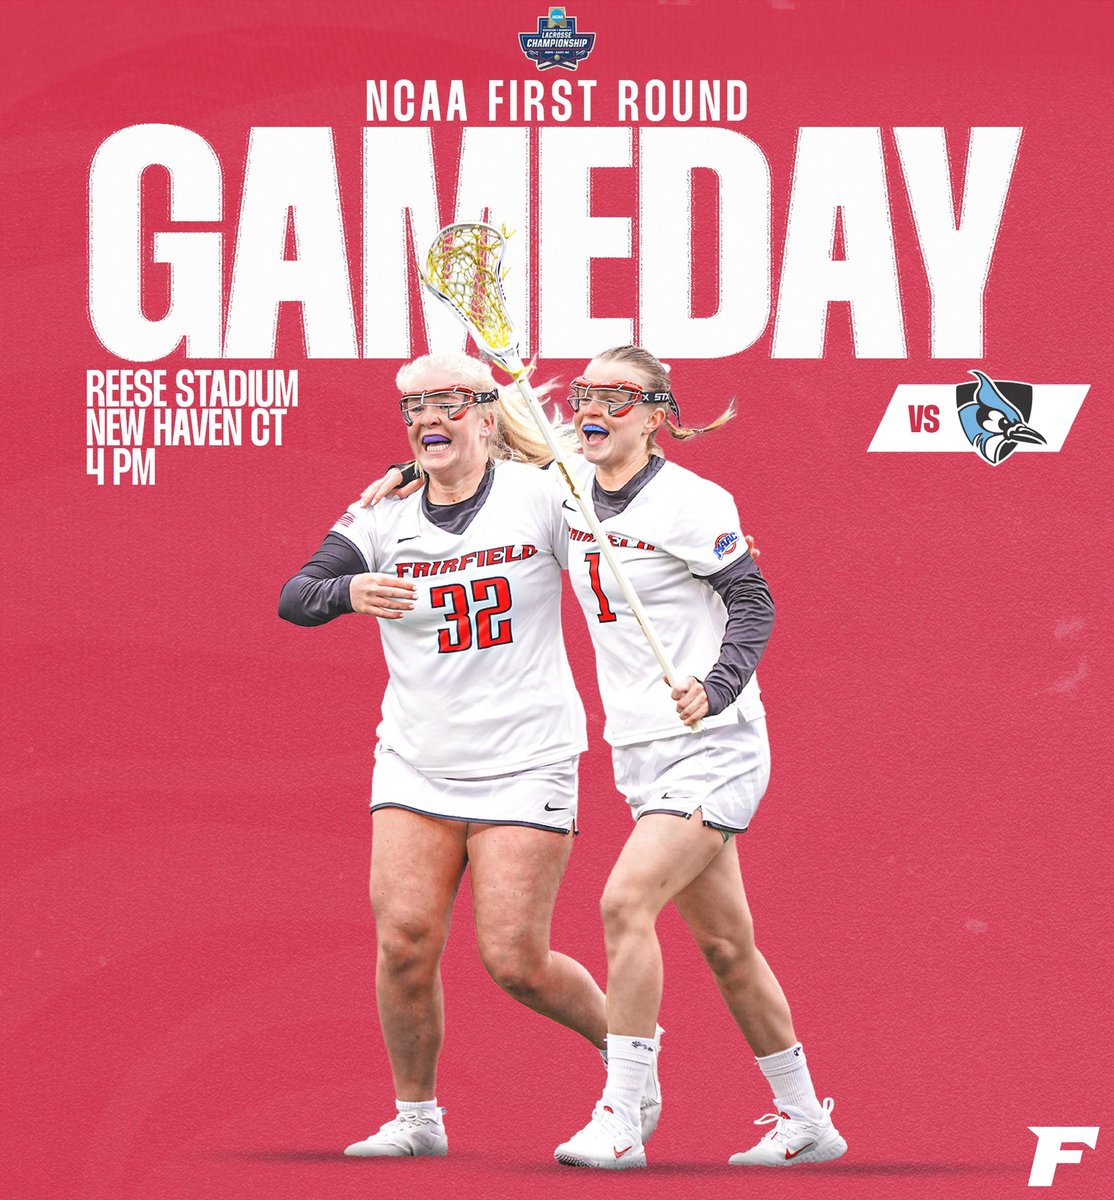 Make today a #FairfieldFriday!   @NCAALax Championship First Round 🆚 #11 Johns Hopkins 📍 New Haven, Conn. ⏰ 4 PM 🎟️ bit.ly/44IVyMc 📺 @ESPNPlus 🎥 bit.ly/4byd8o8 📊 ncaa.com/game/6291985   #WeAreStags 🤘🥍